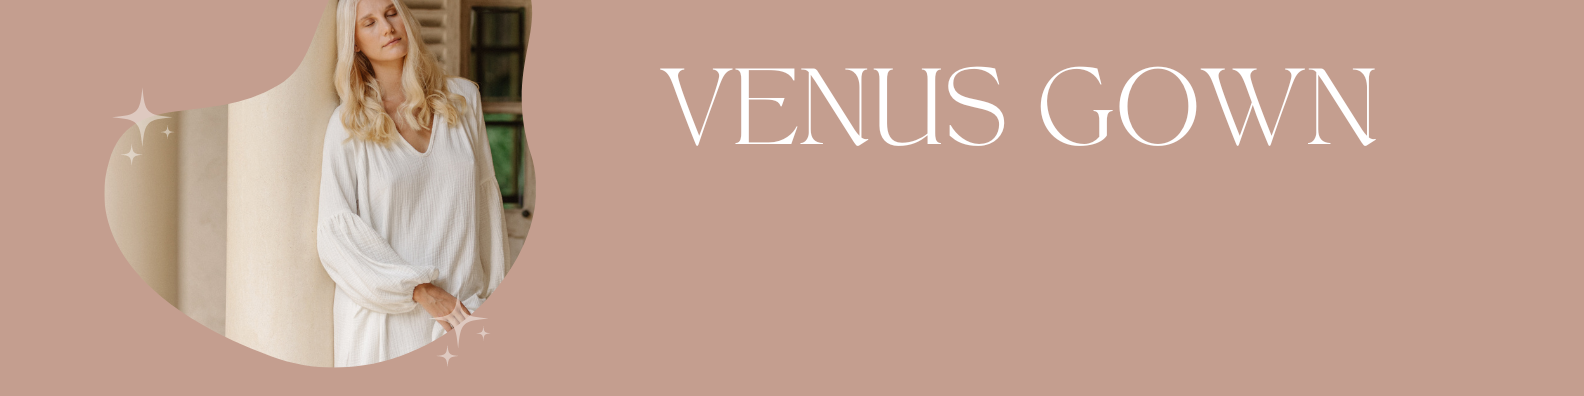 Meet our latest Venus Gown and musings about the planet of love